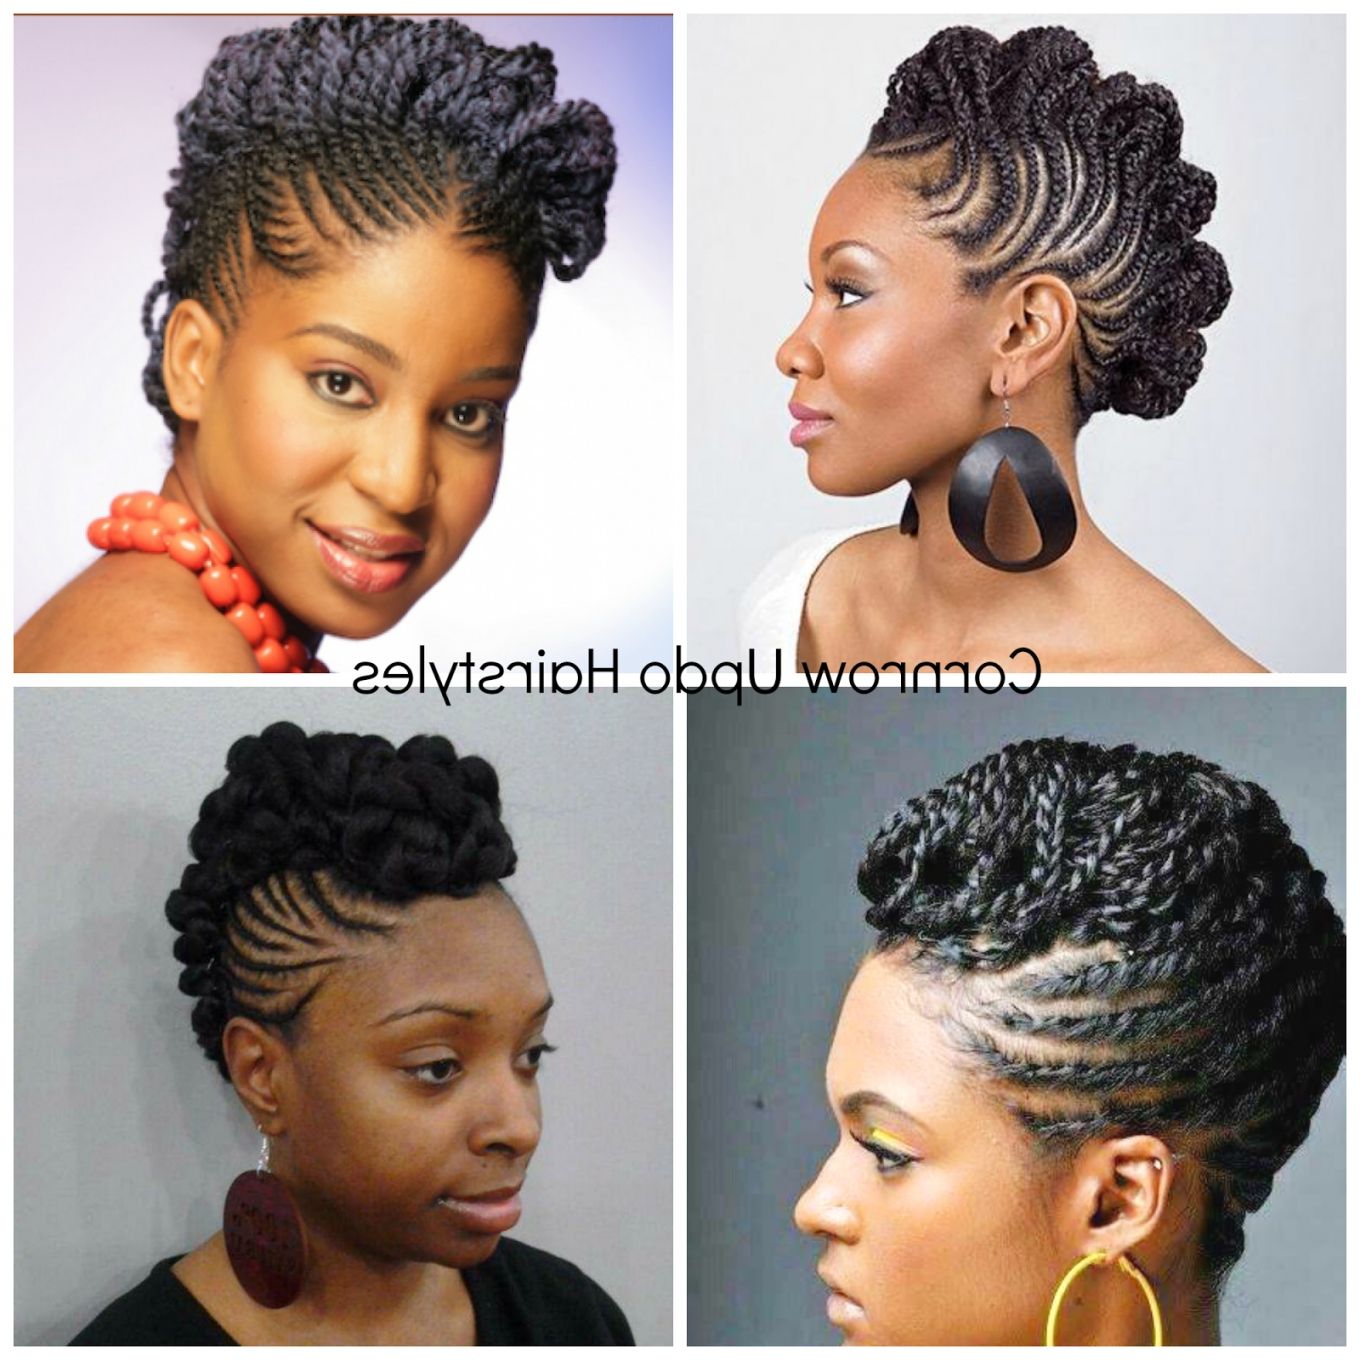 Updo Cornrow Hairstyles – 42lions | Latest Hairstyles & Haircuts For Regarding Updo Cornrow Hairstyles (View 14 of 15)